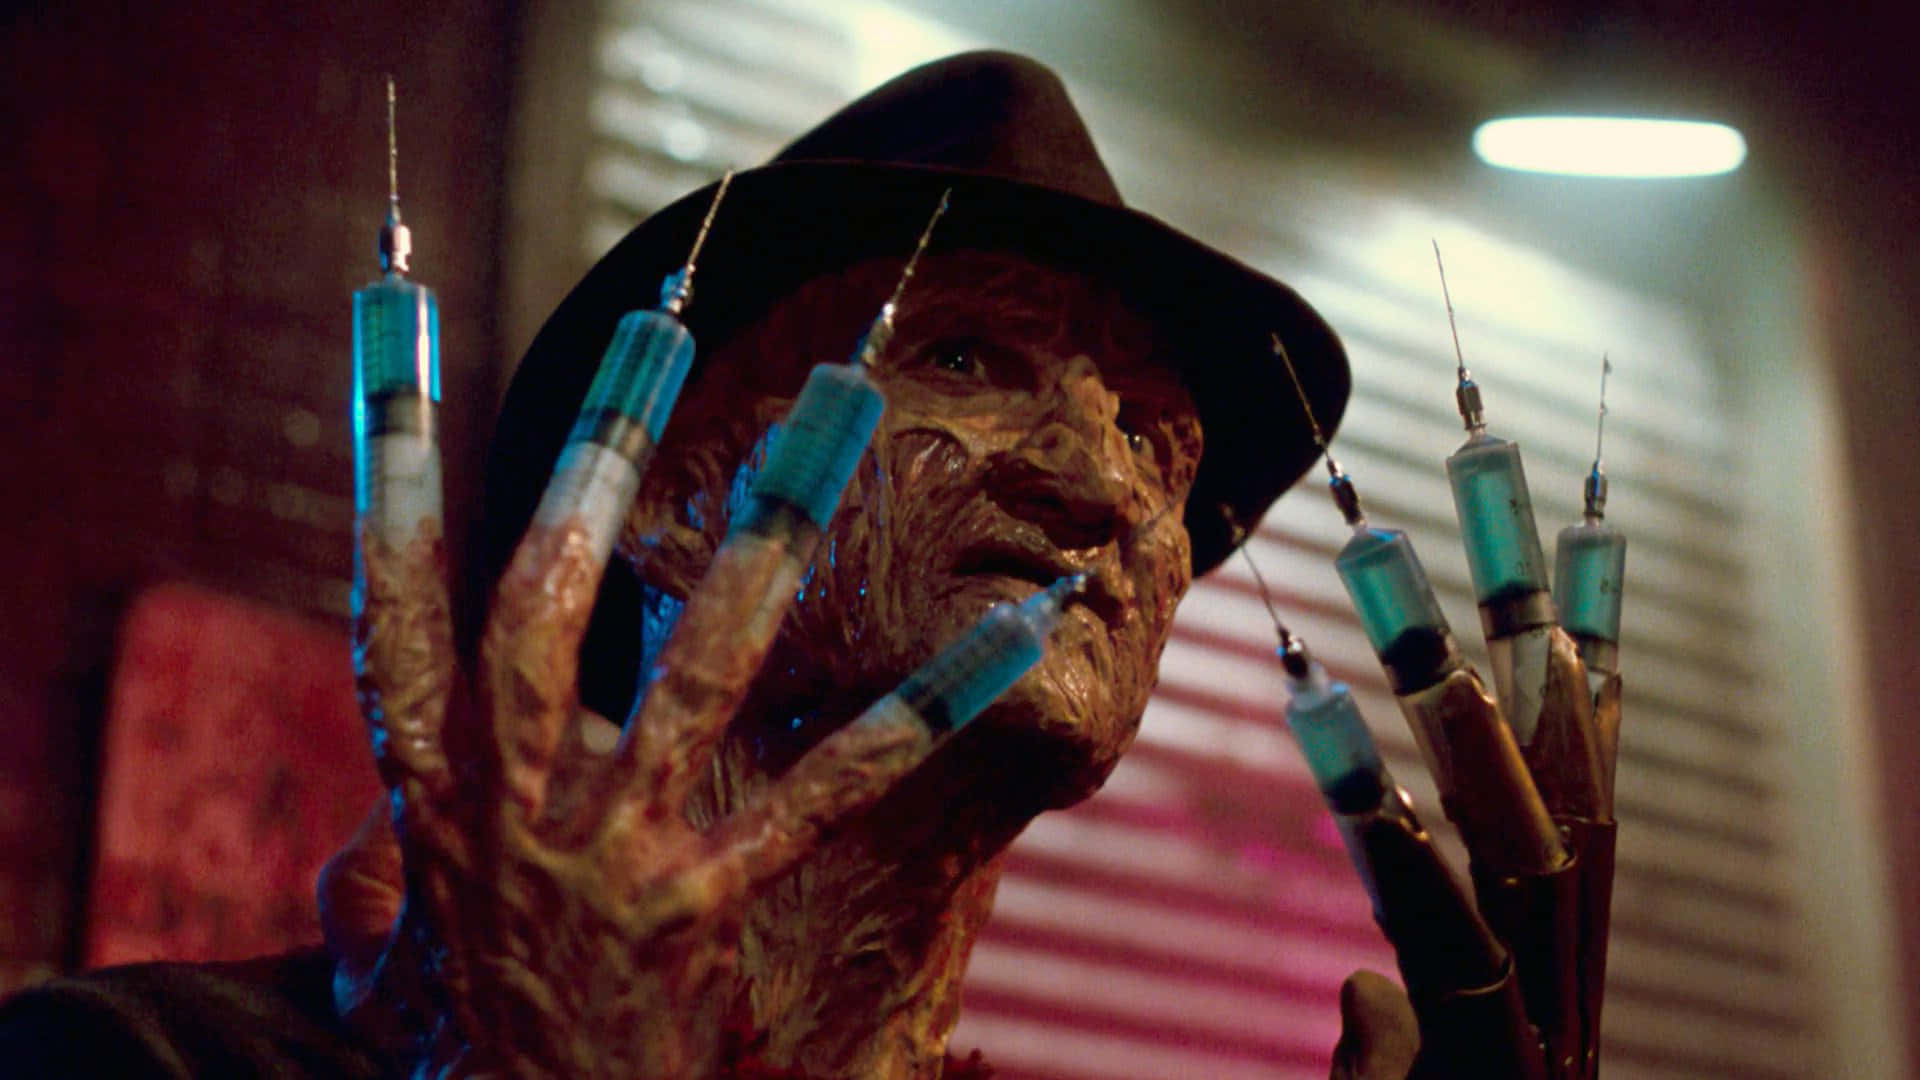 The nightmare creature Freddy Krueger in all his terrifying glory.